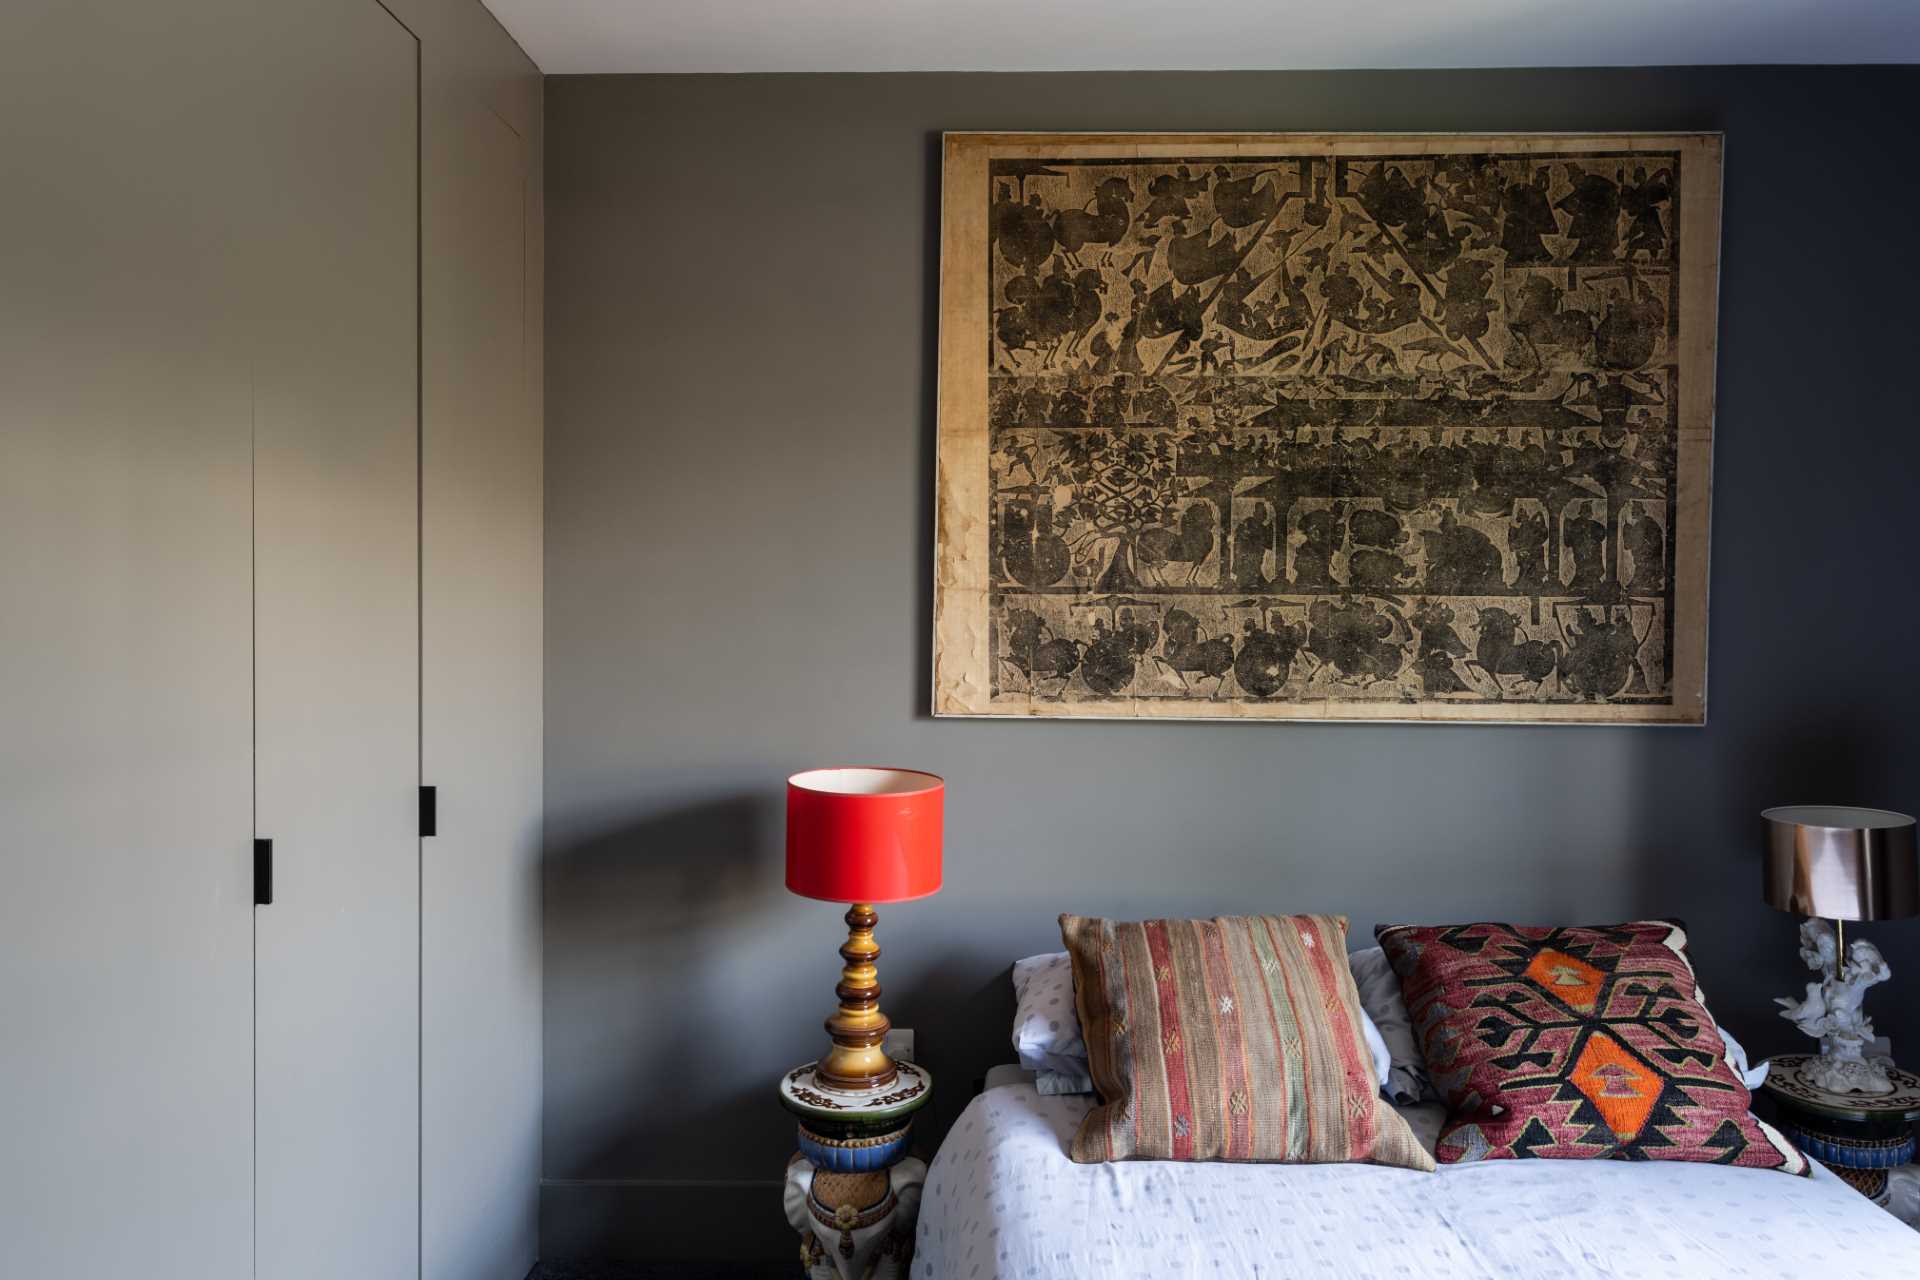 In a guest bedroom, dark walls allow the colorful accents to stand out.